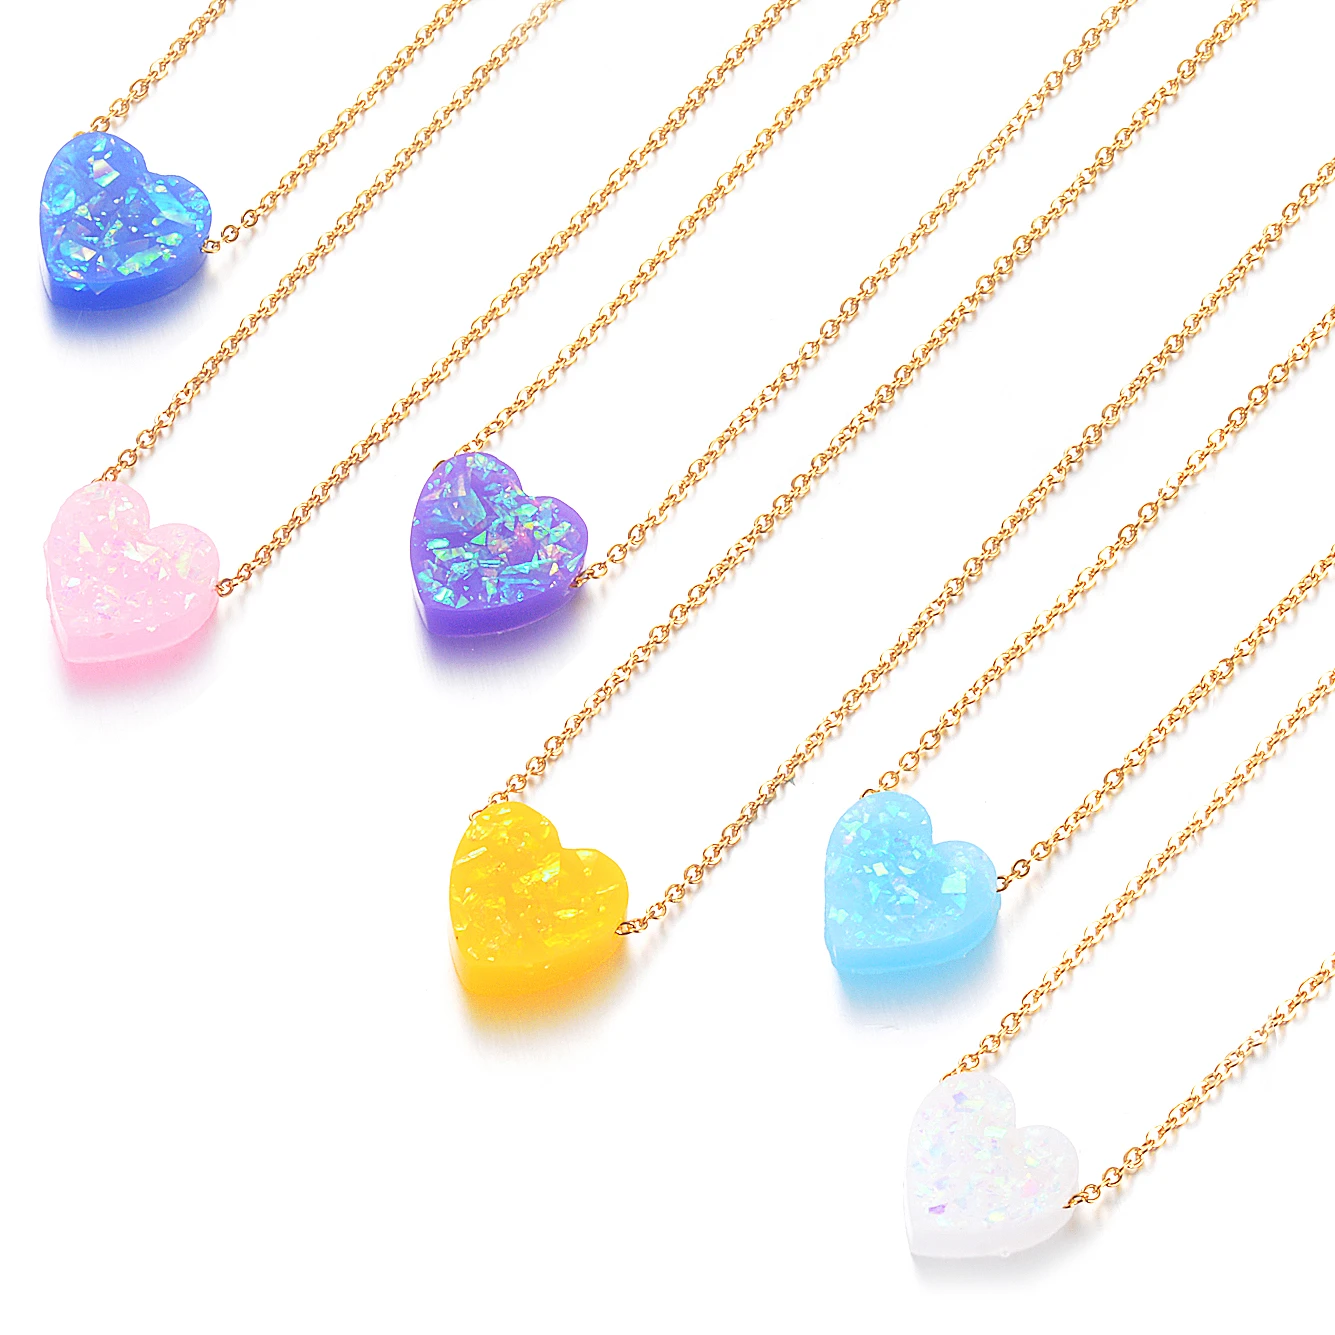 6 Colors 12mm Heart Shape Opal Stone Pendant Necklace 316L Stainless Steel Gold Chain Collar Jewelry Girlfriend Gifts